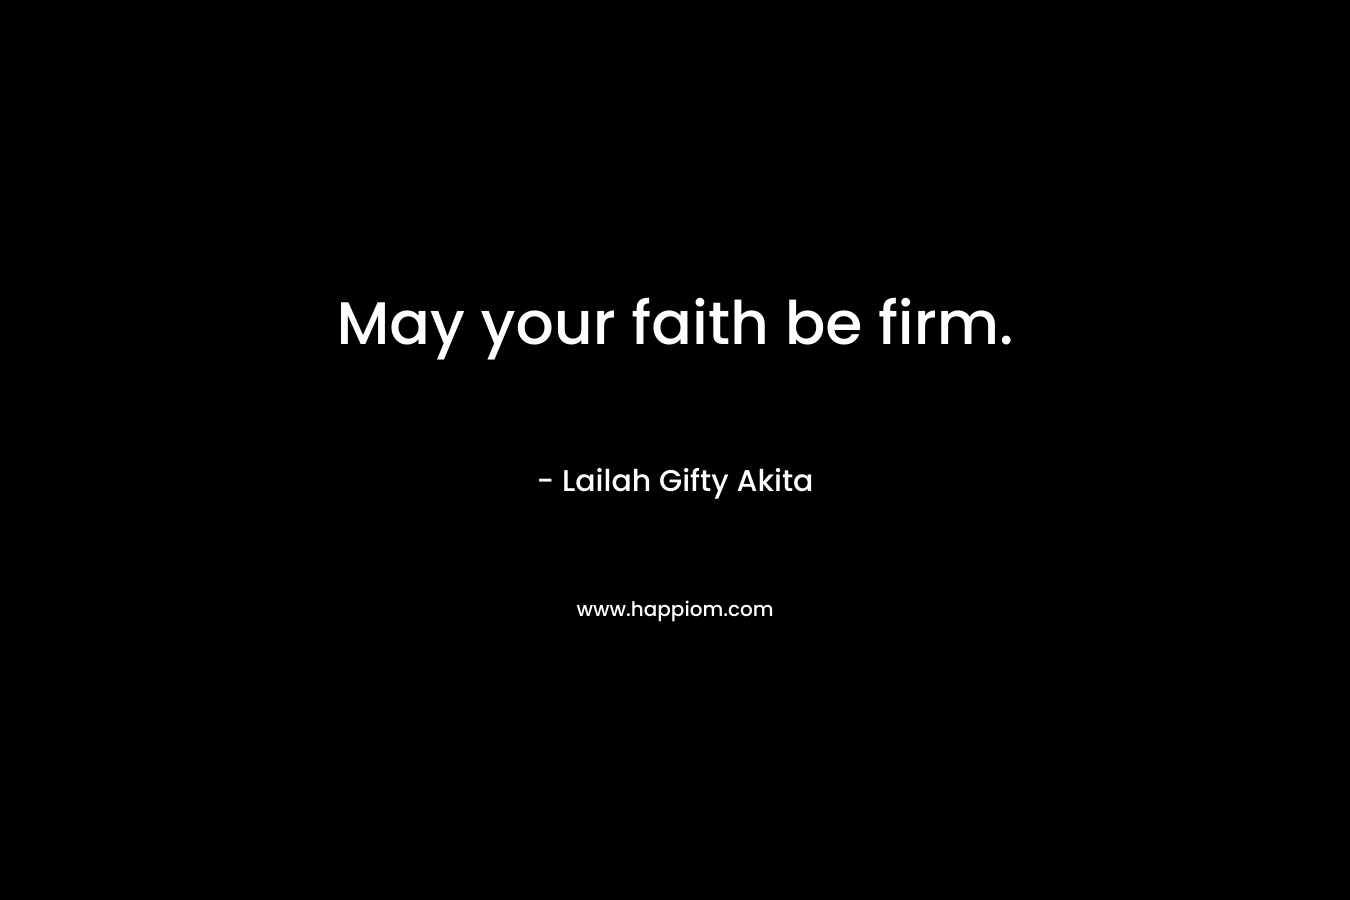 May your faith be firm.